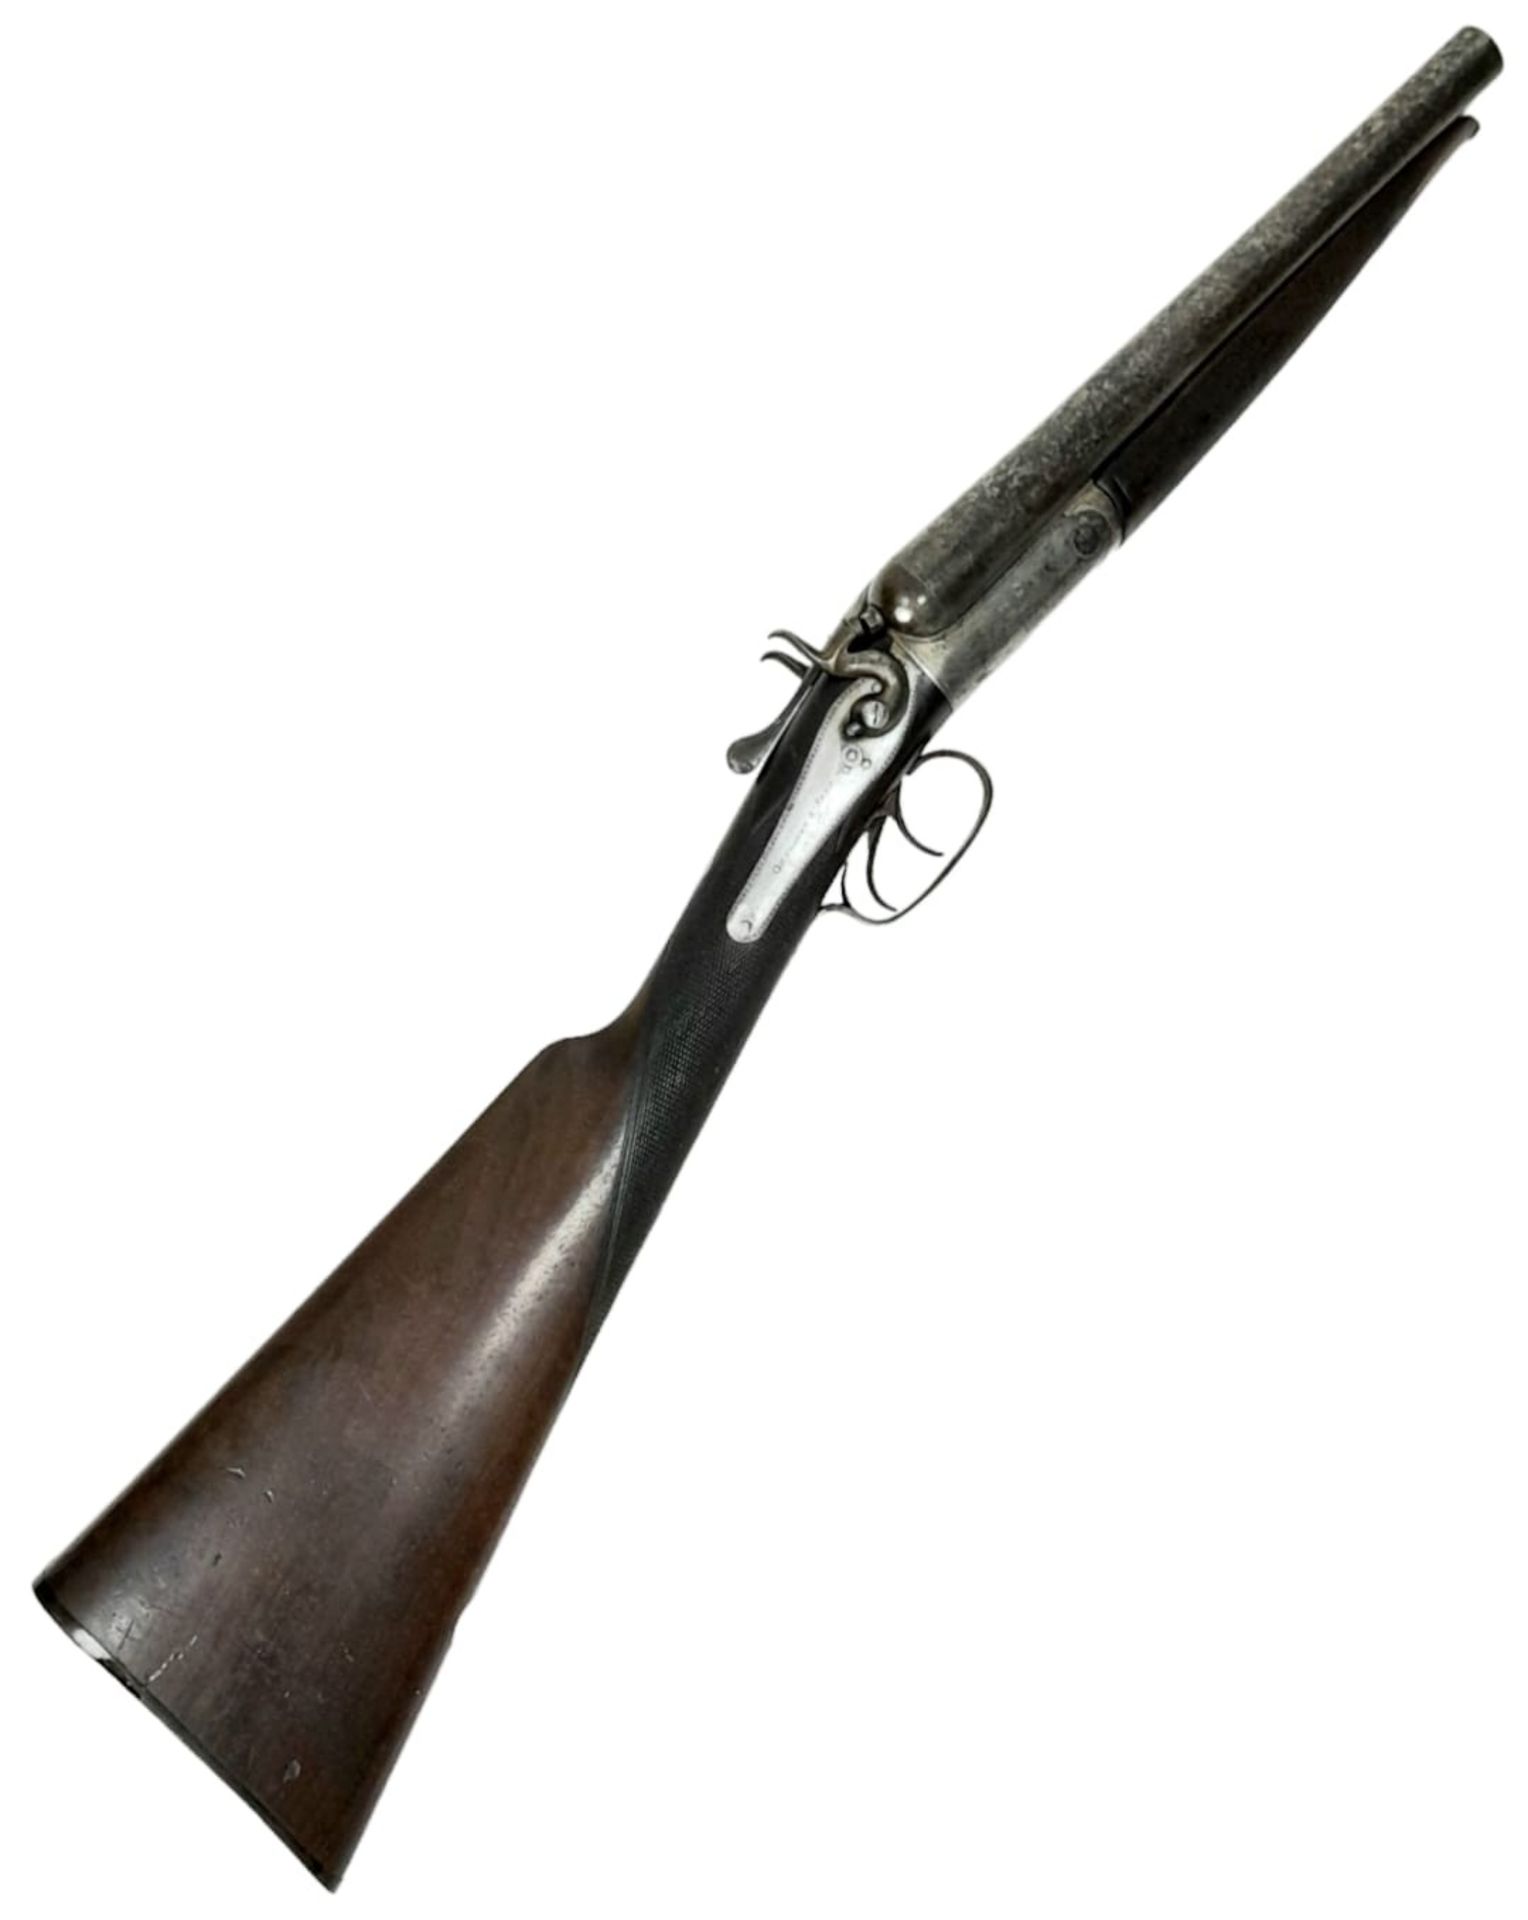 A Deactivated Antique Double Barrelled Sawn Off Shotgun. This British H. Clarke and Sons, Side by